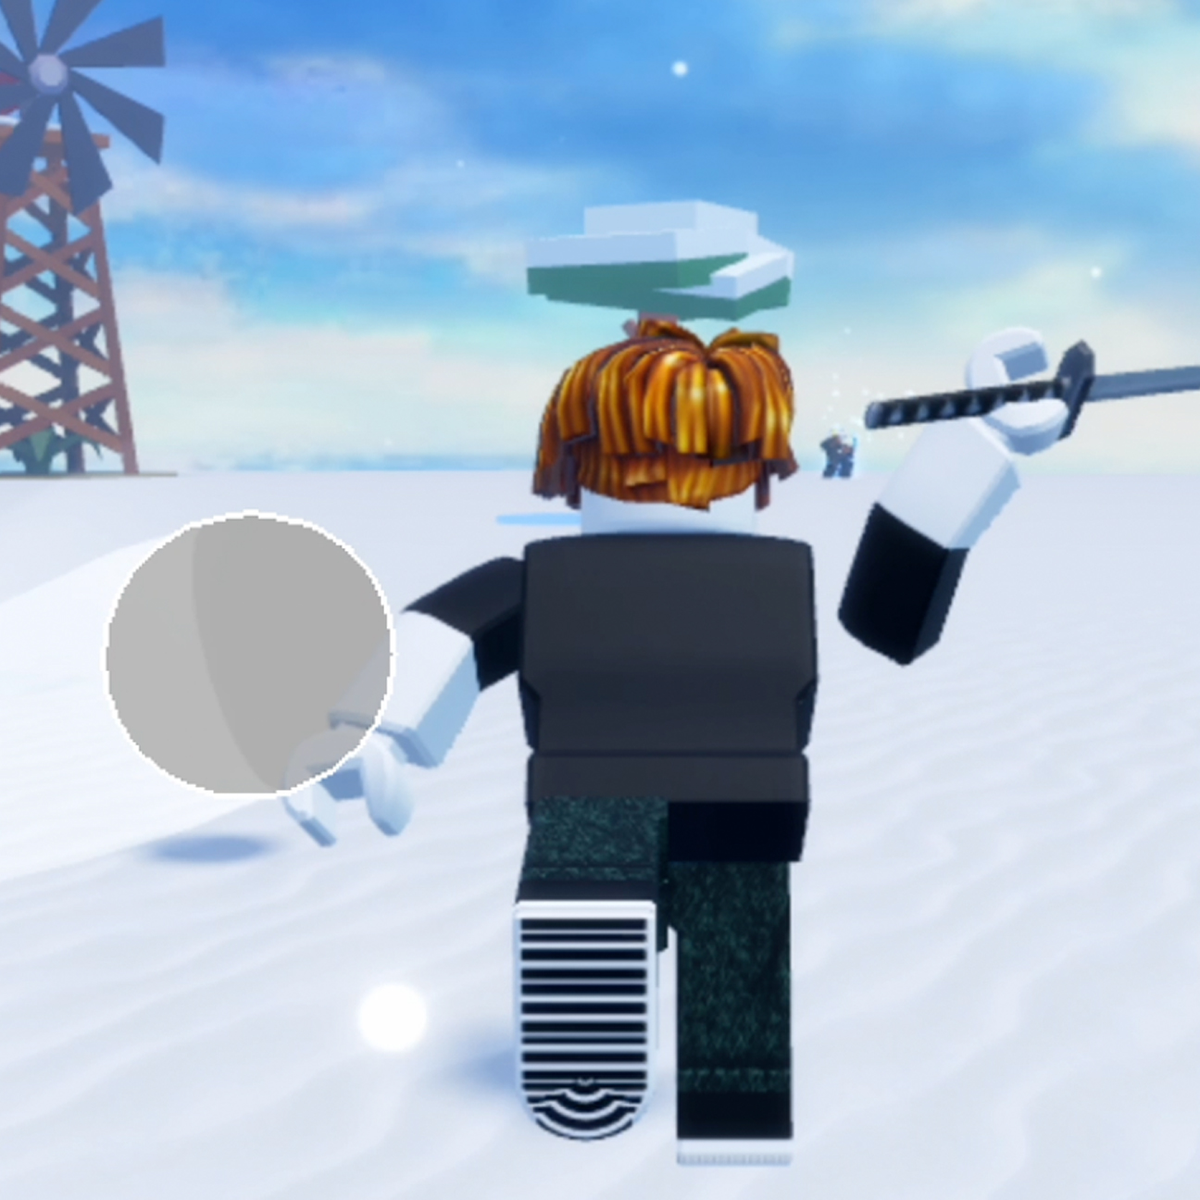 ALL NEW WORKING CODES FOR BLADE BALL IN 2023! ROBLOX BLADE BALL CODES 